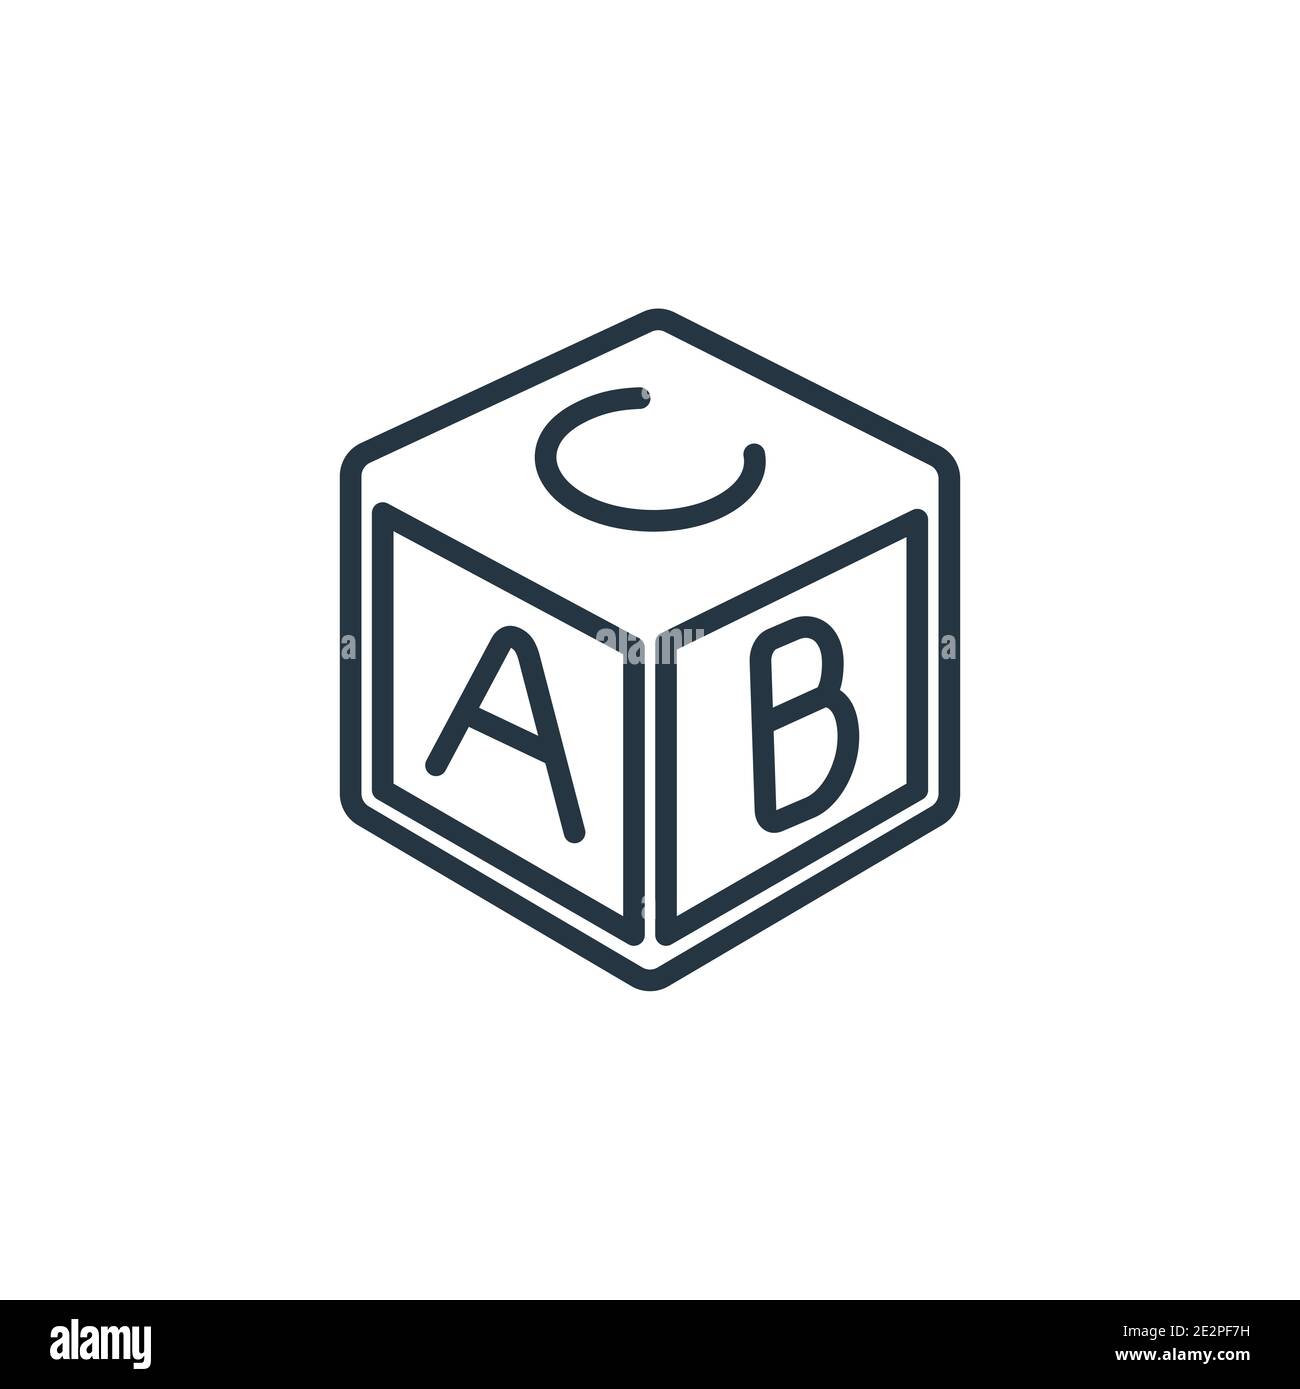 https://c8.alamy.com/comp/2E2PF7H/abc-outline-vector-icon-thin-line-black-abc-icon-flat-vector-simple-element-illustration-from-editable-education-concept-isolated-on-white-backgroun-2E2PF7H.jpg